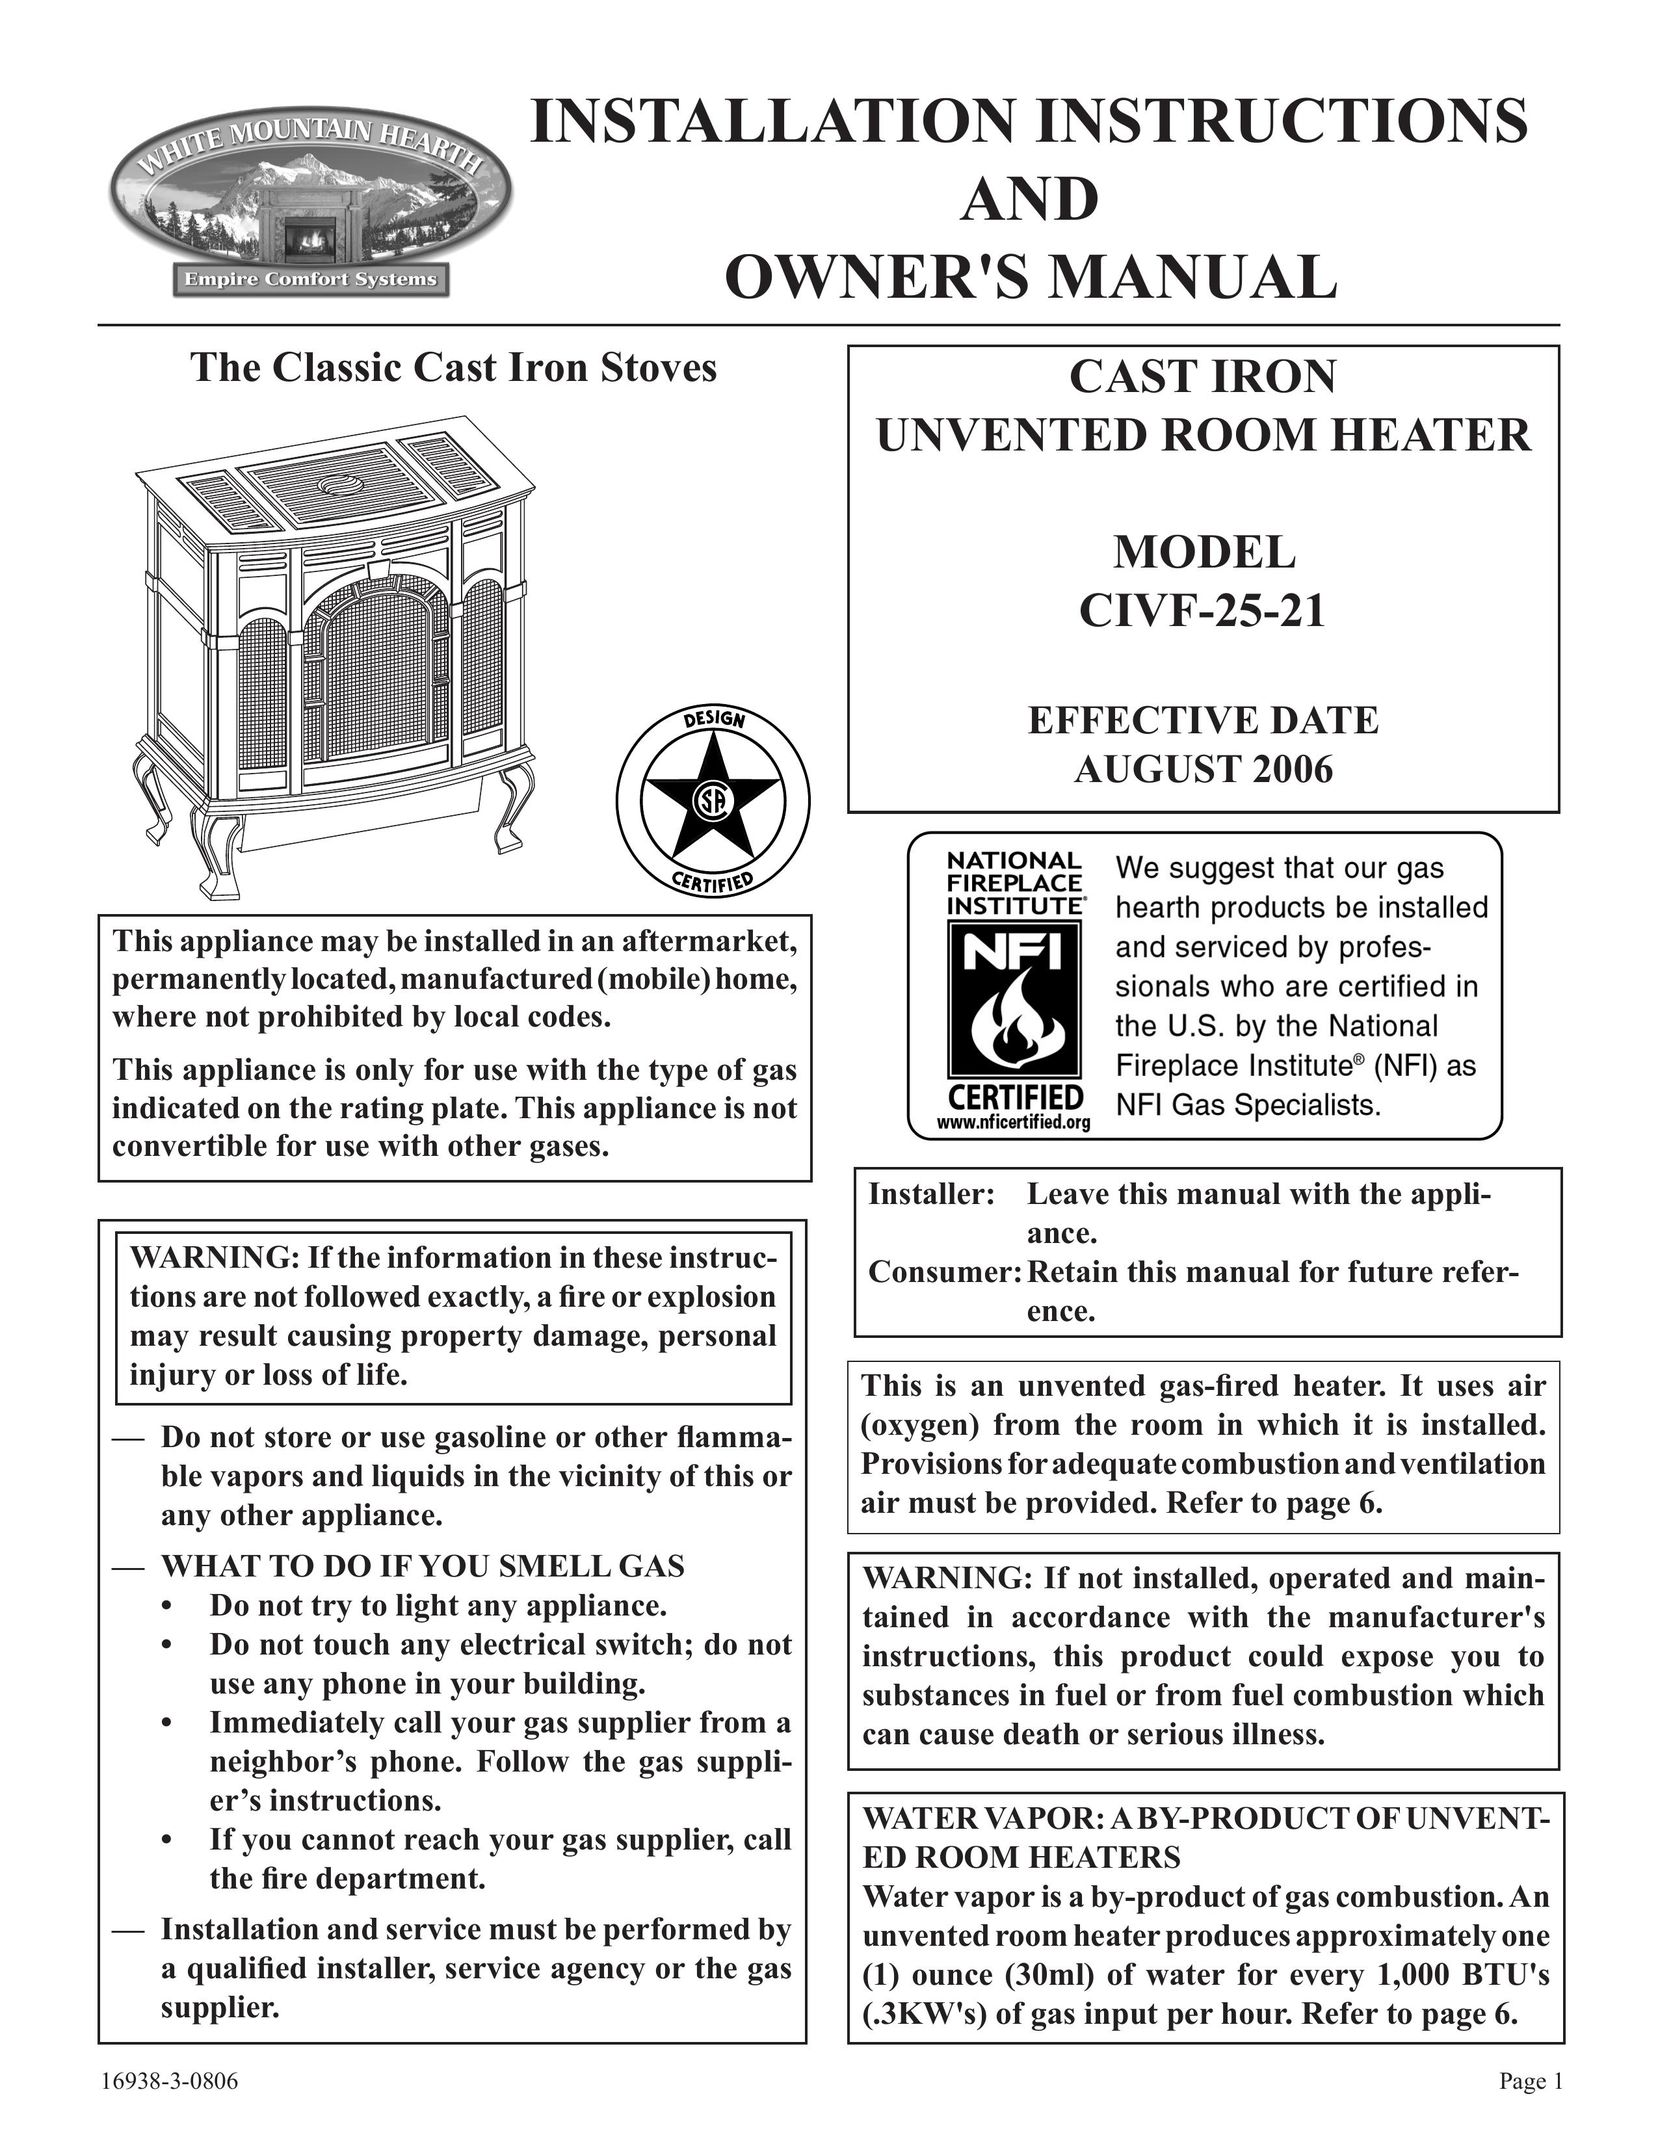 Empire Comfort Systems CIVF-25-21 Electric Heater User Manual